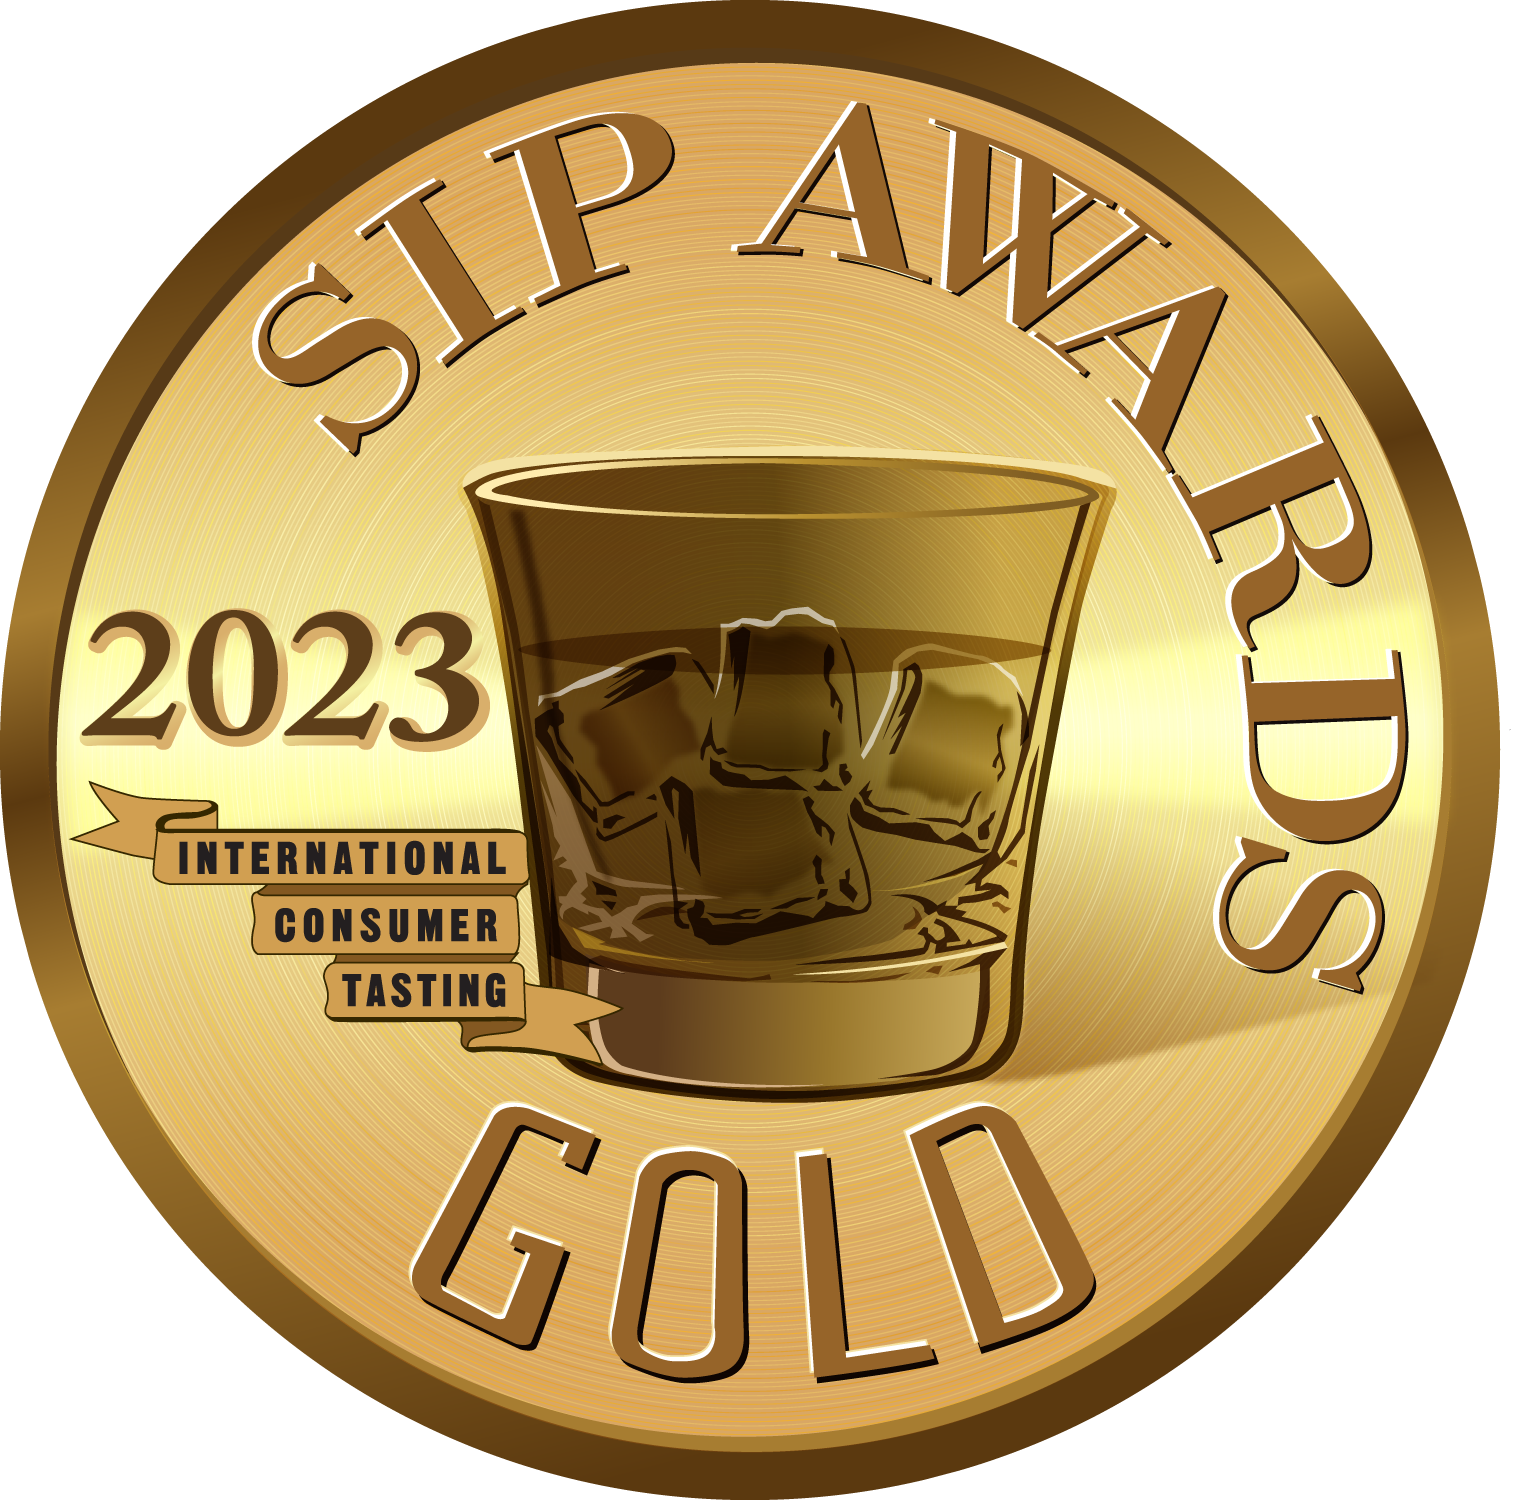 Mixoloshe won the Sip Awards Gold Medal in 2023